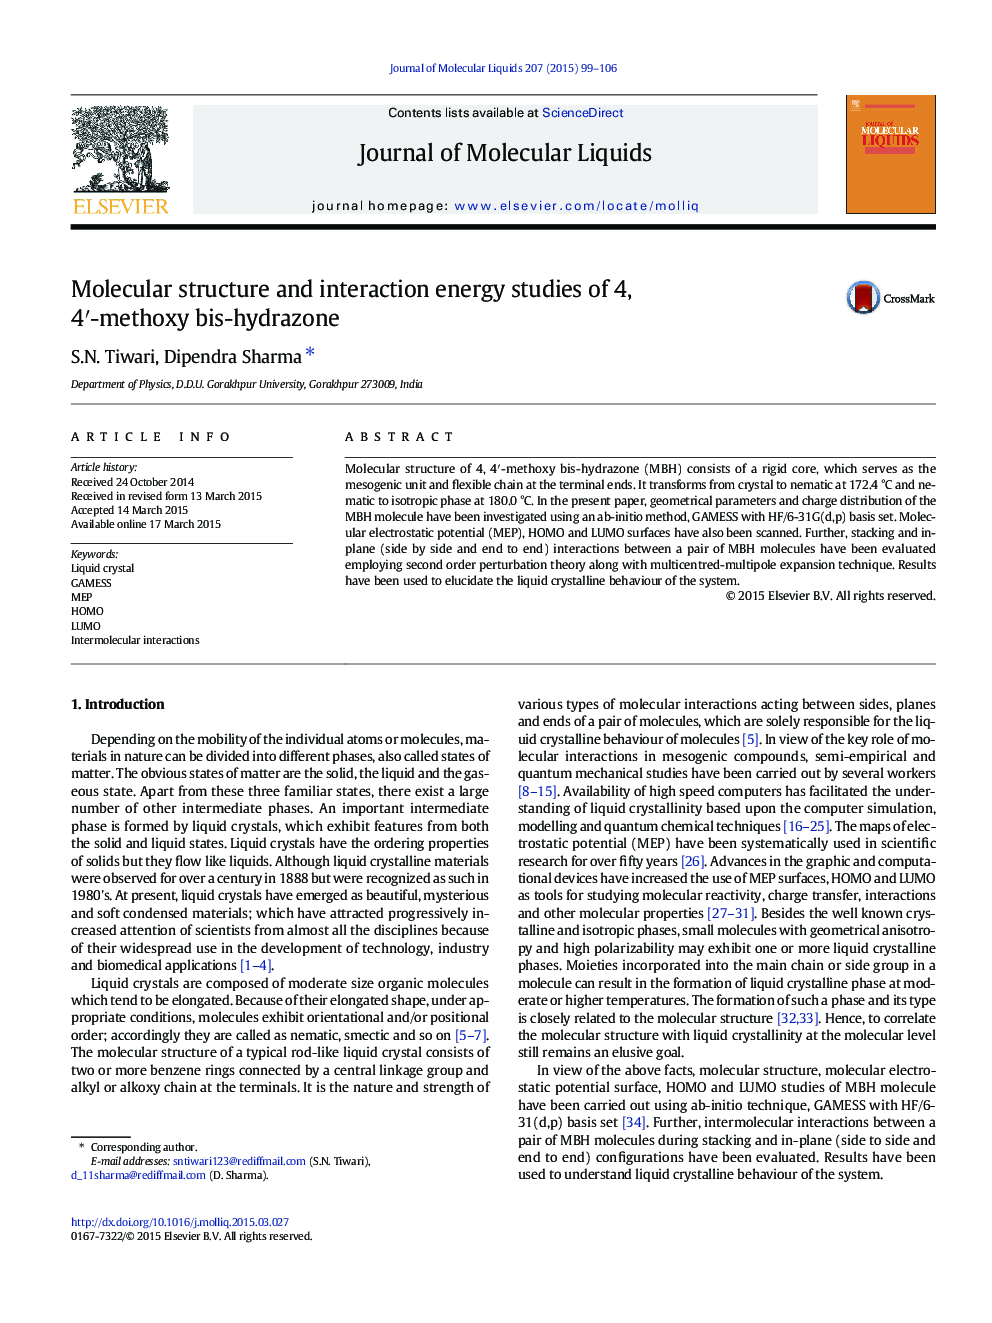 Molecular structure and interaction energy studies of 4, 4â²-methoxy bis-hydrazone